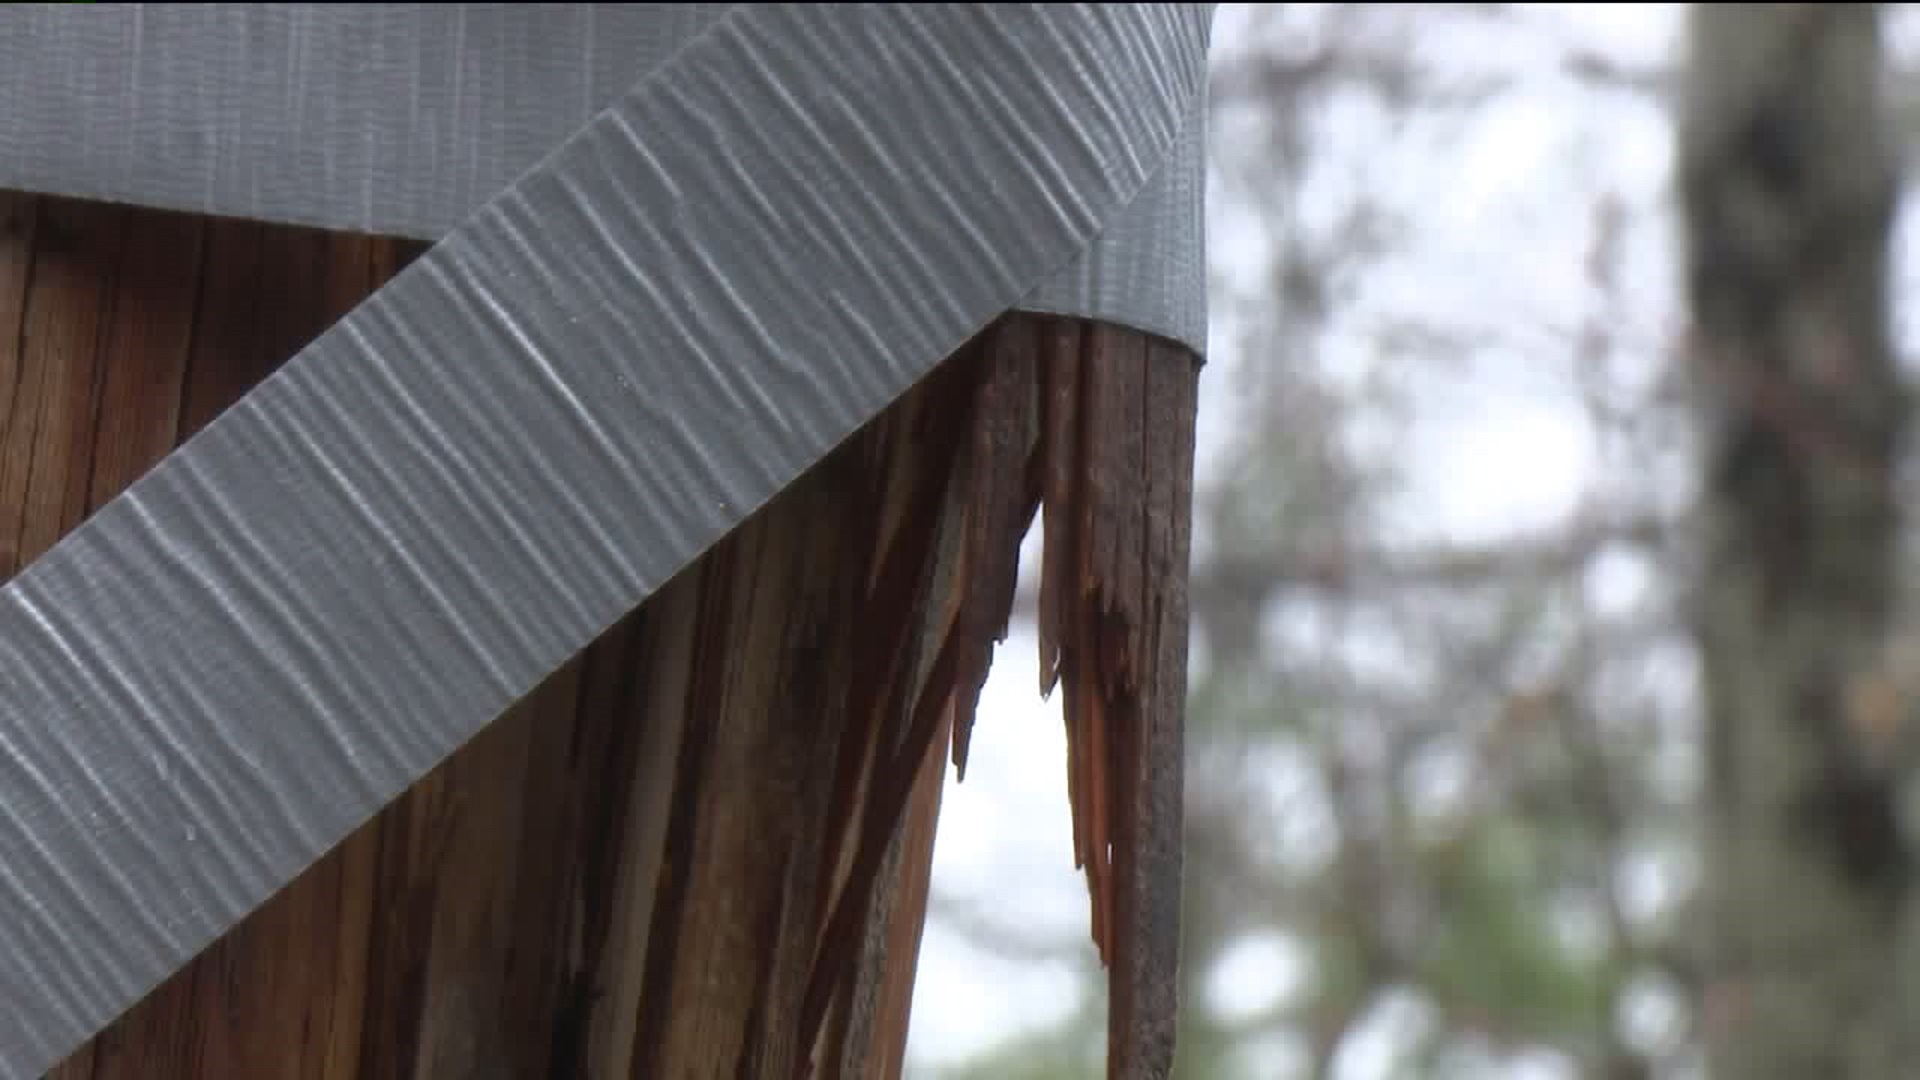 Tale of the Tape: Duct Tape Wrapped Around Utility Pole Has Residents Asking a Lot of Questions